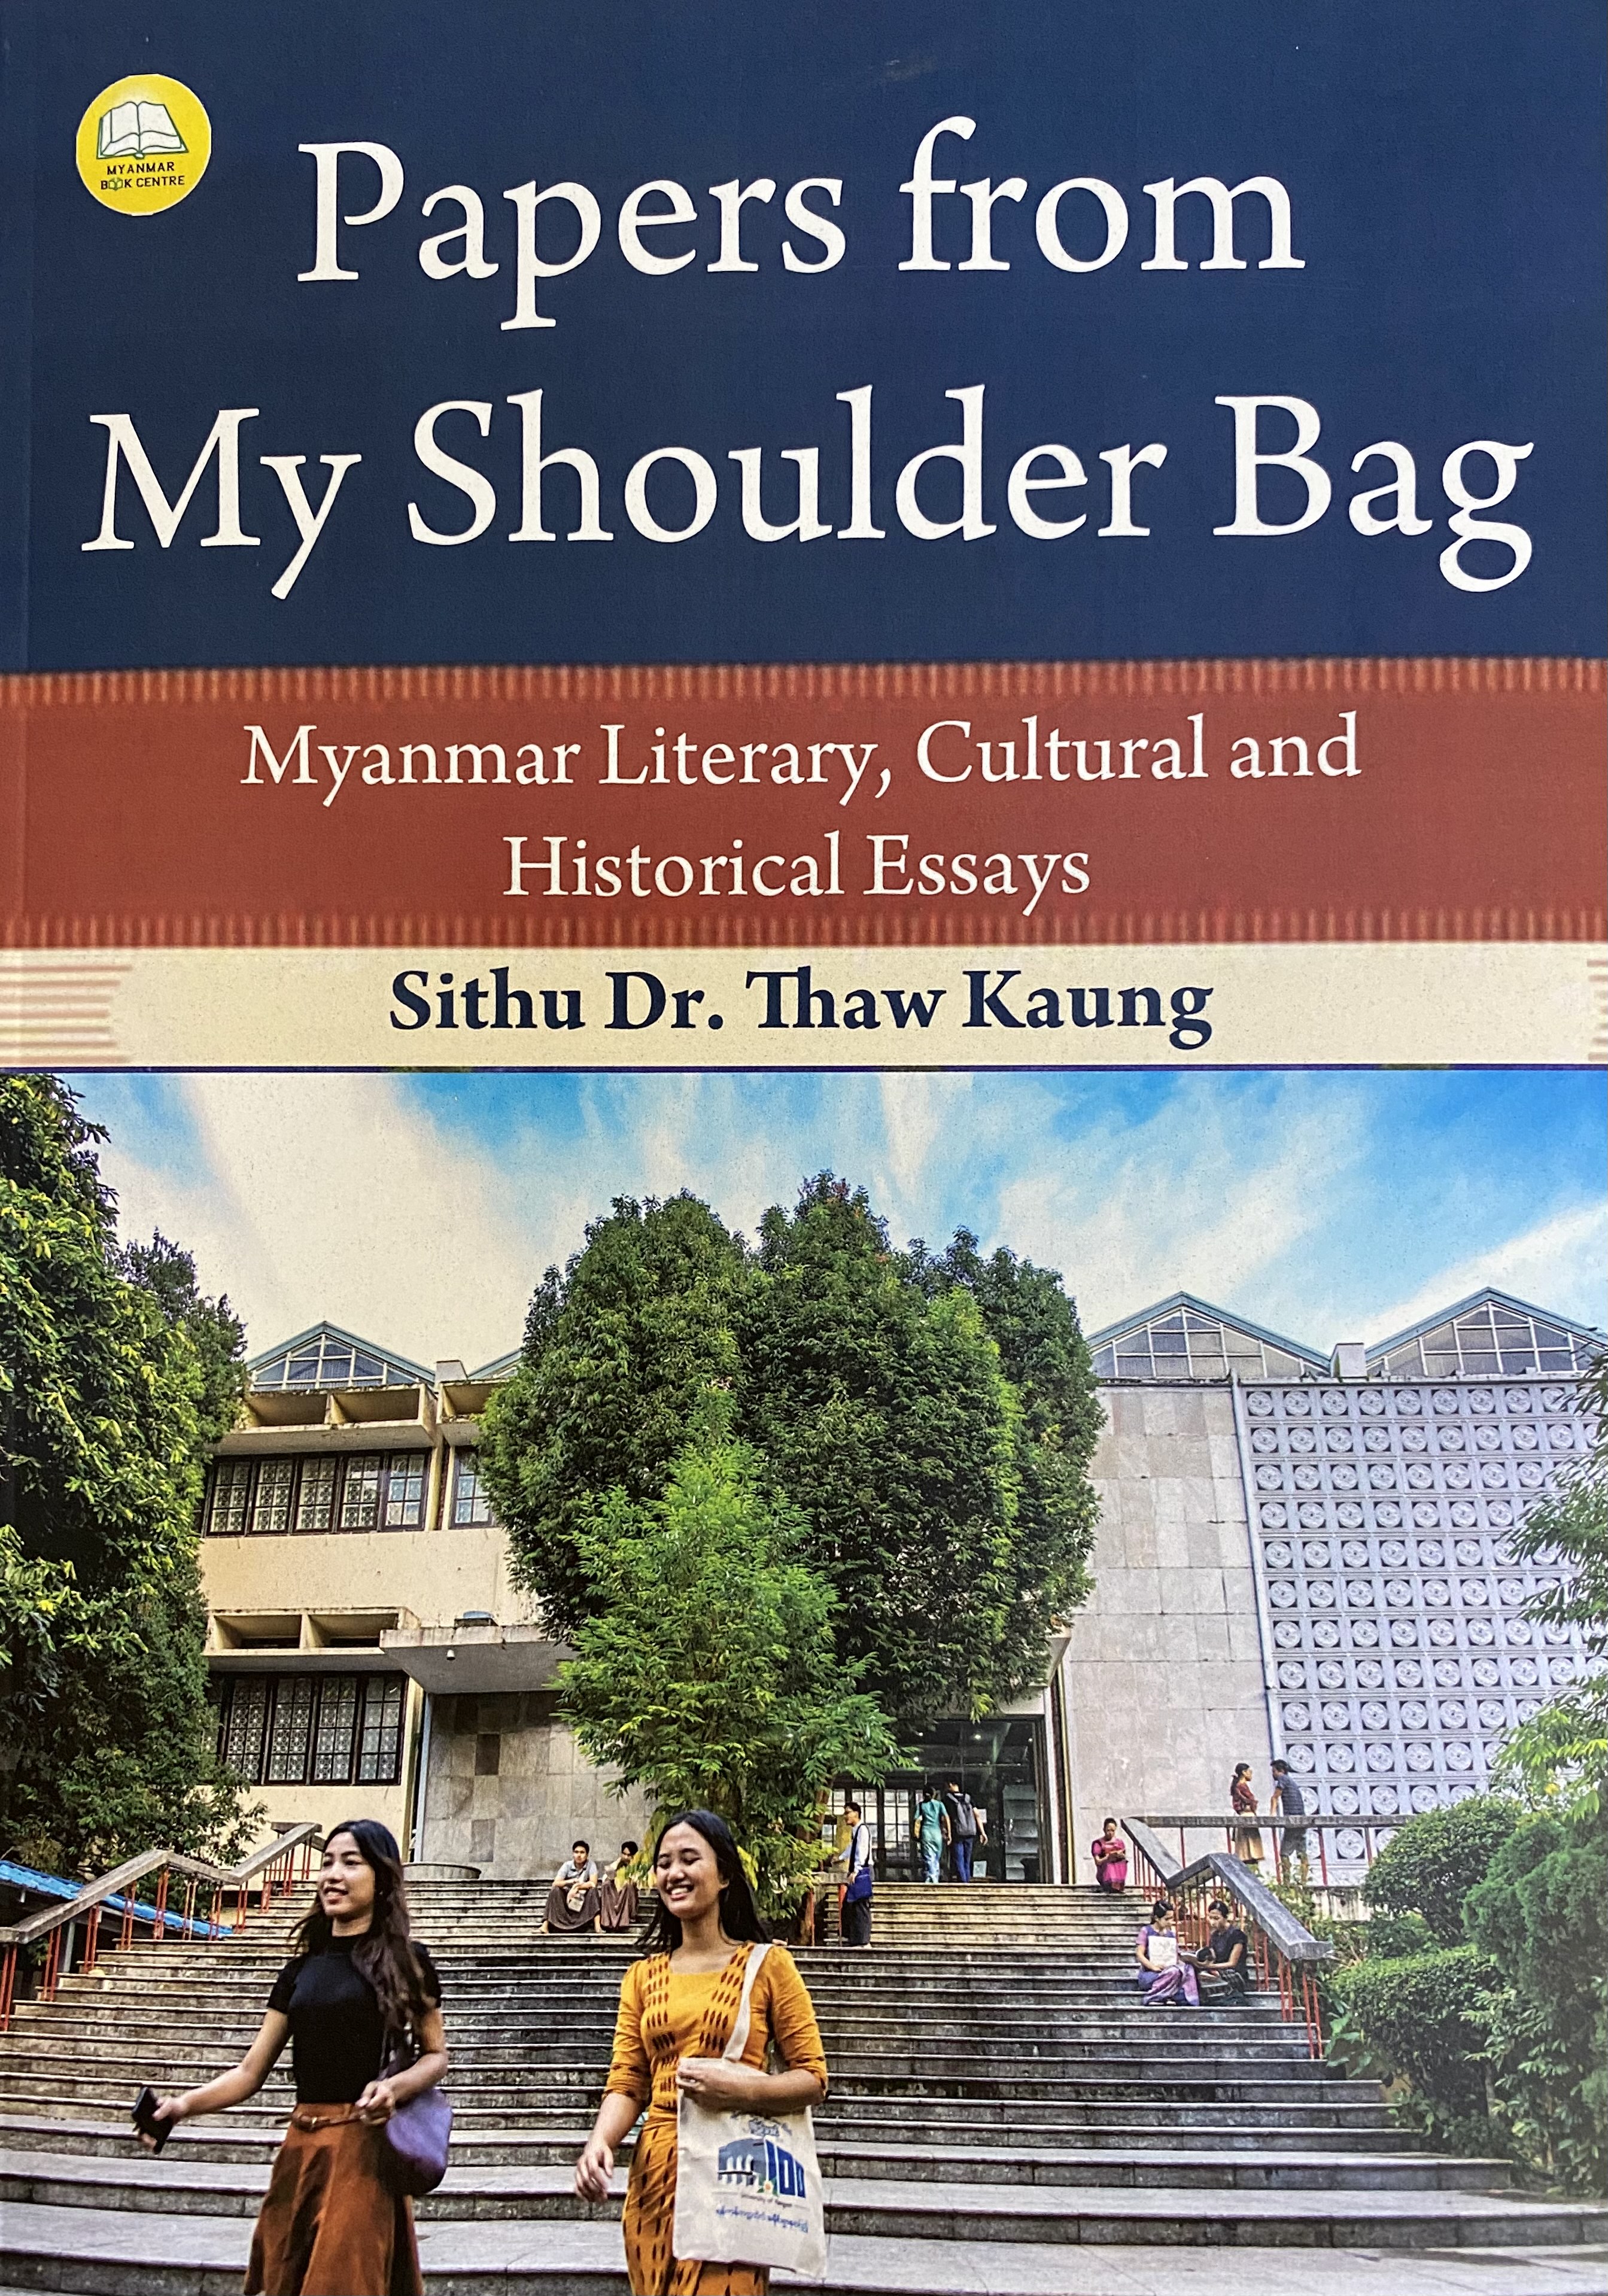 Papers from My Shoulder Bag: Myanmar Literary, Cultural and Historical Essays